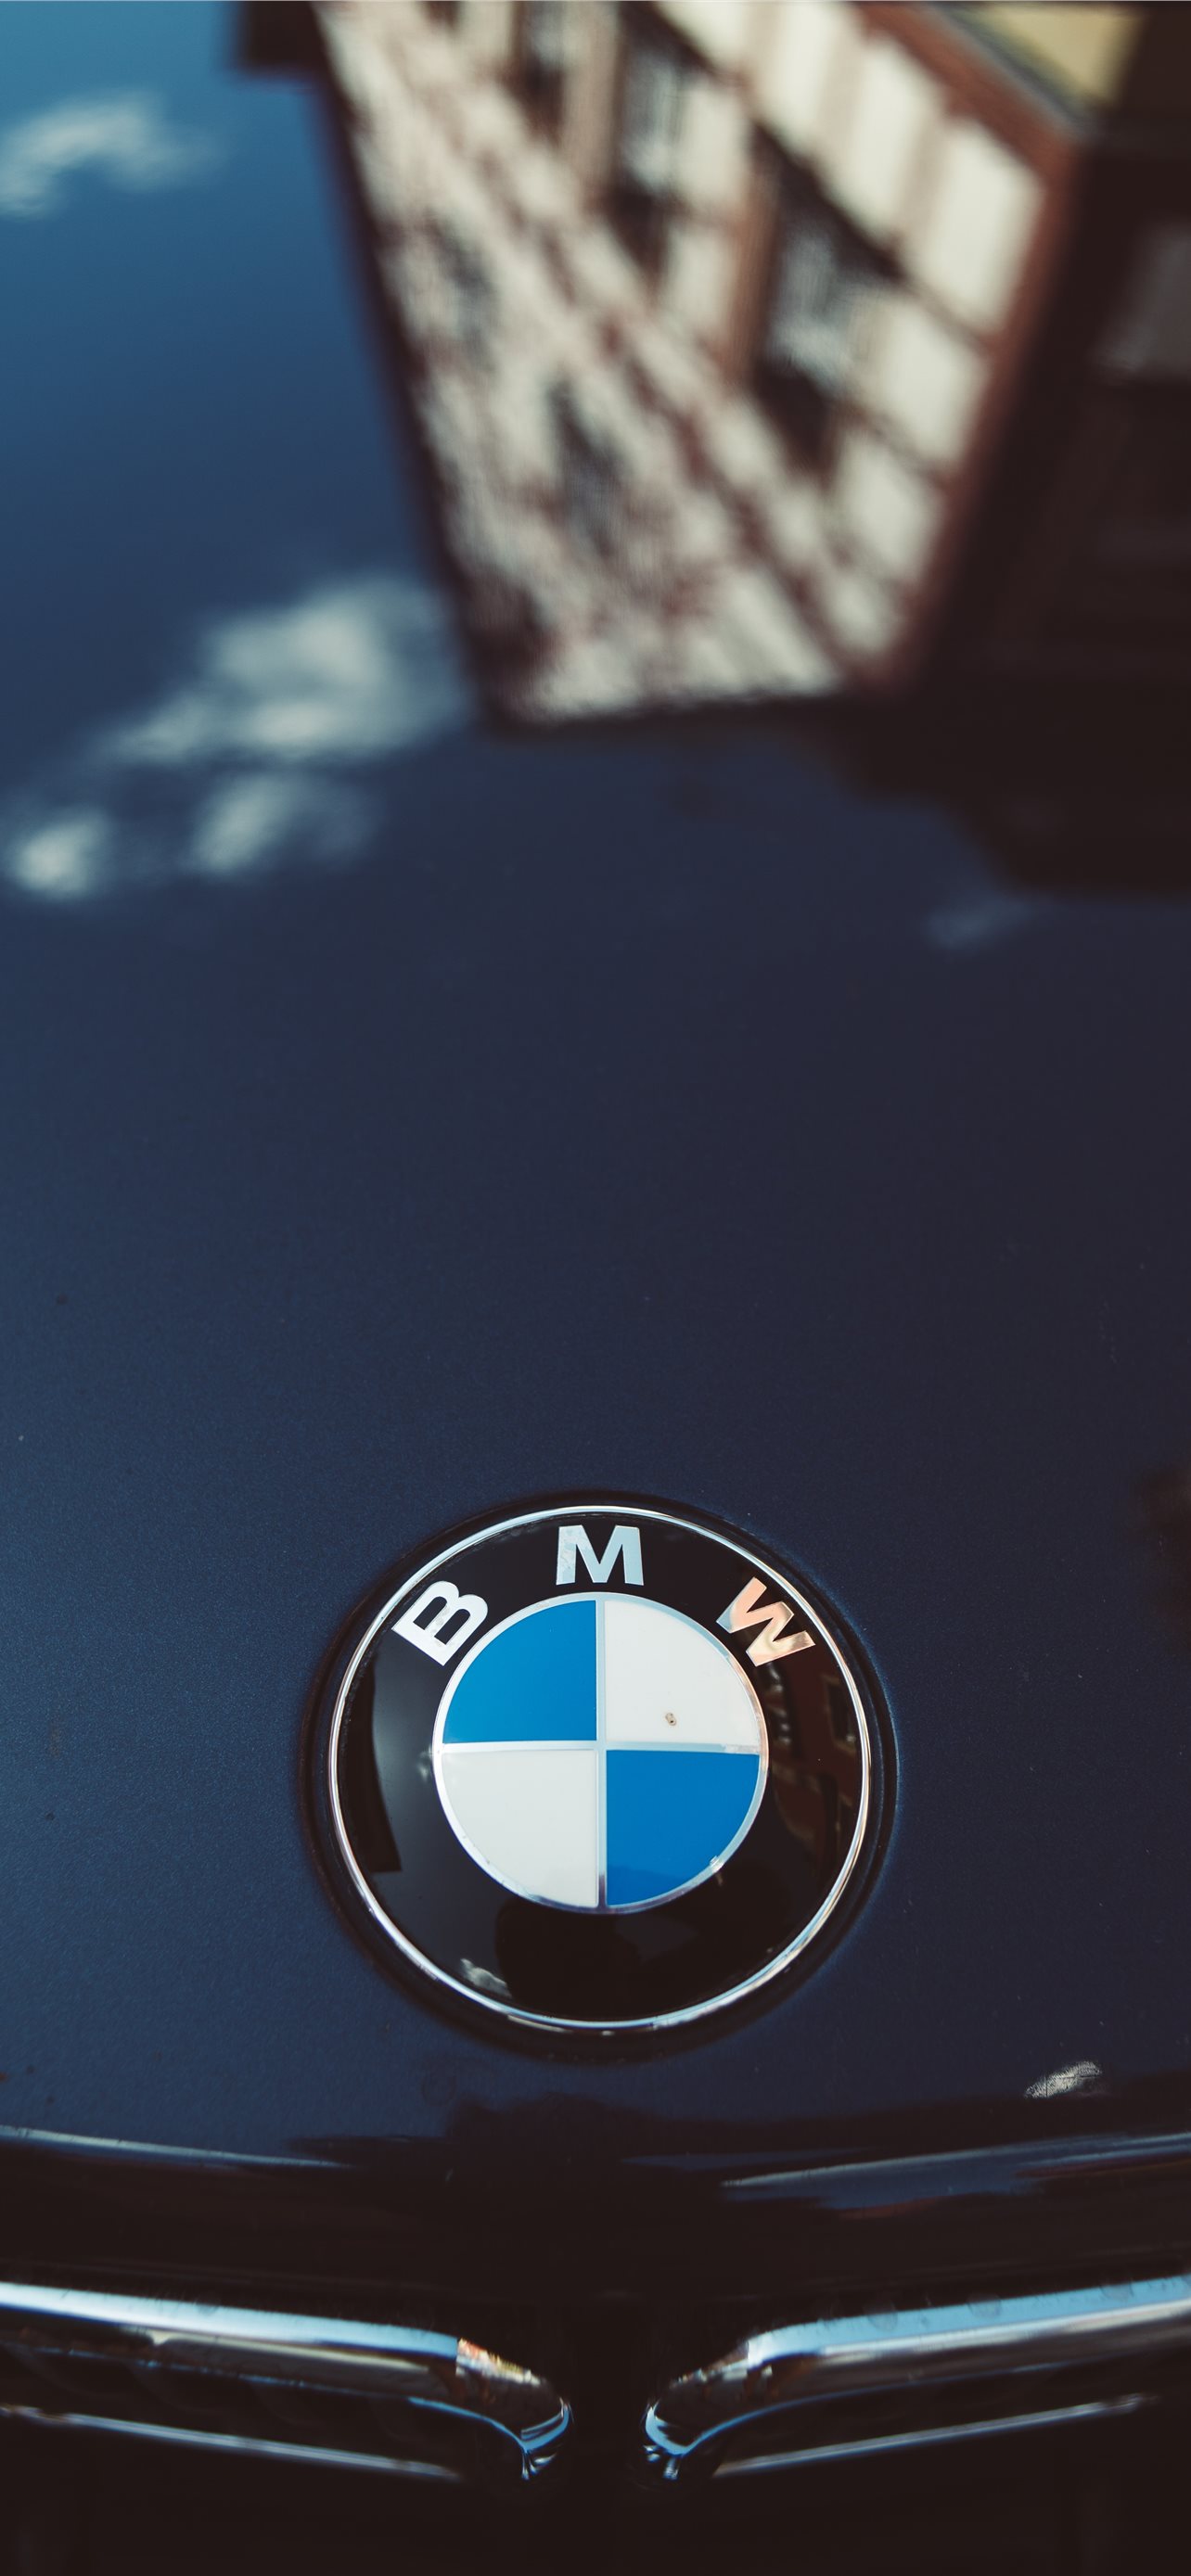 Download wallpapers BMW wooden logo, 4K, wooden backgrounds, cars brands, BMW  logo, creative, wood carving, BMW for desktop with resolution 3840x2400.  High Quality HD pictures wallpapers